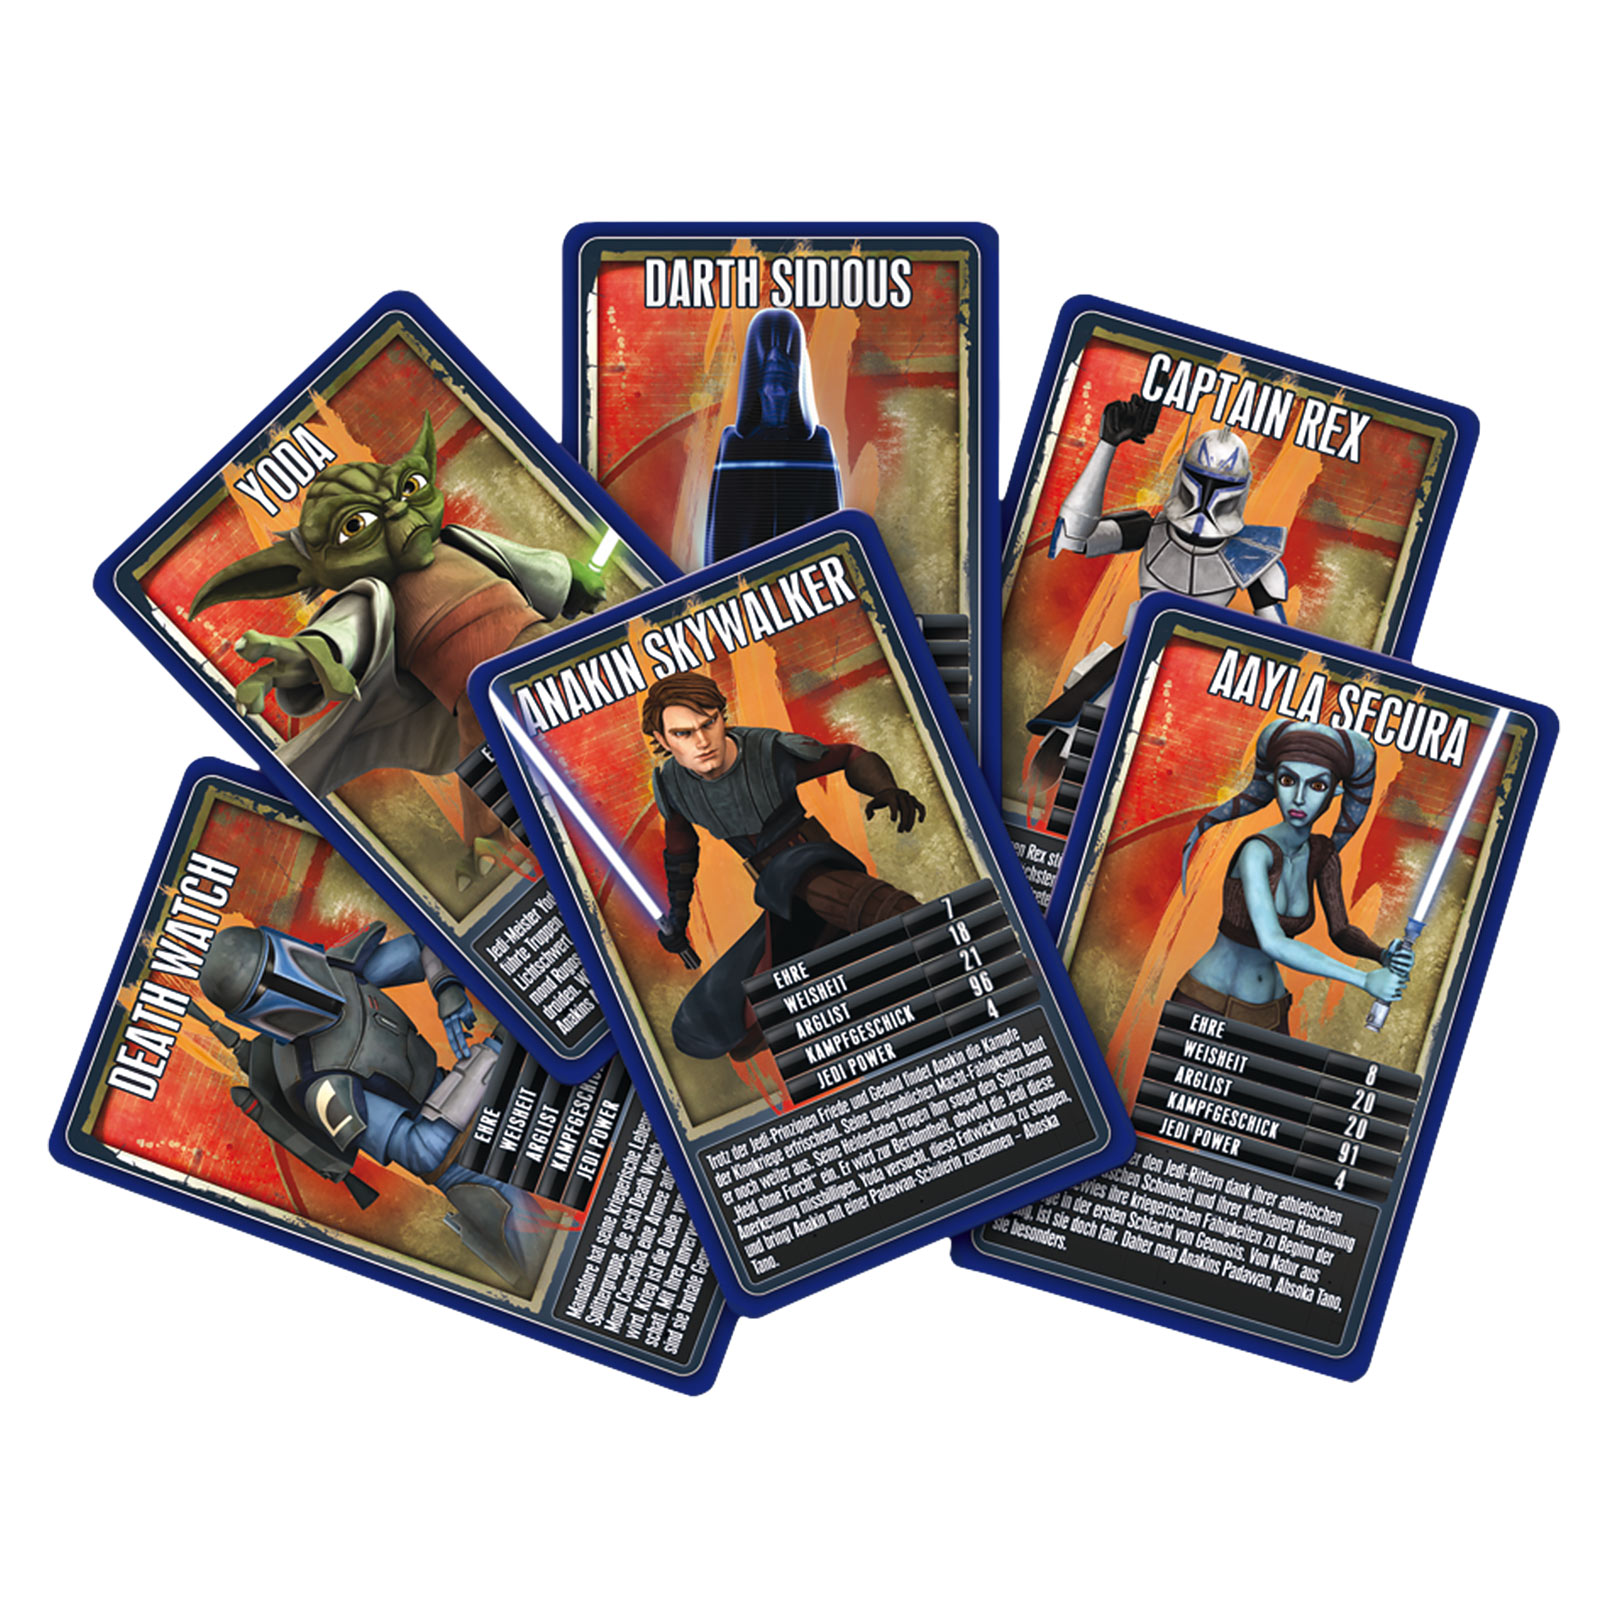 Star Wars - Rise of the Bounty Hunters Top Trumps